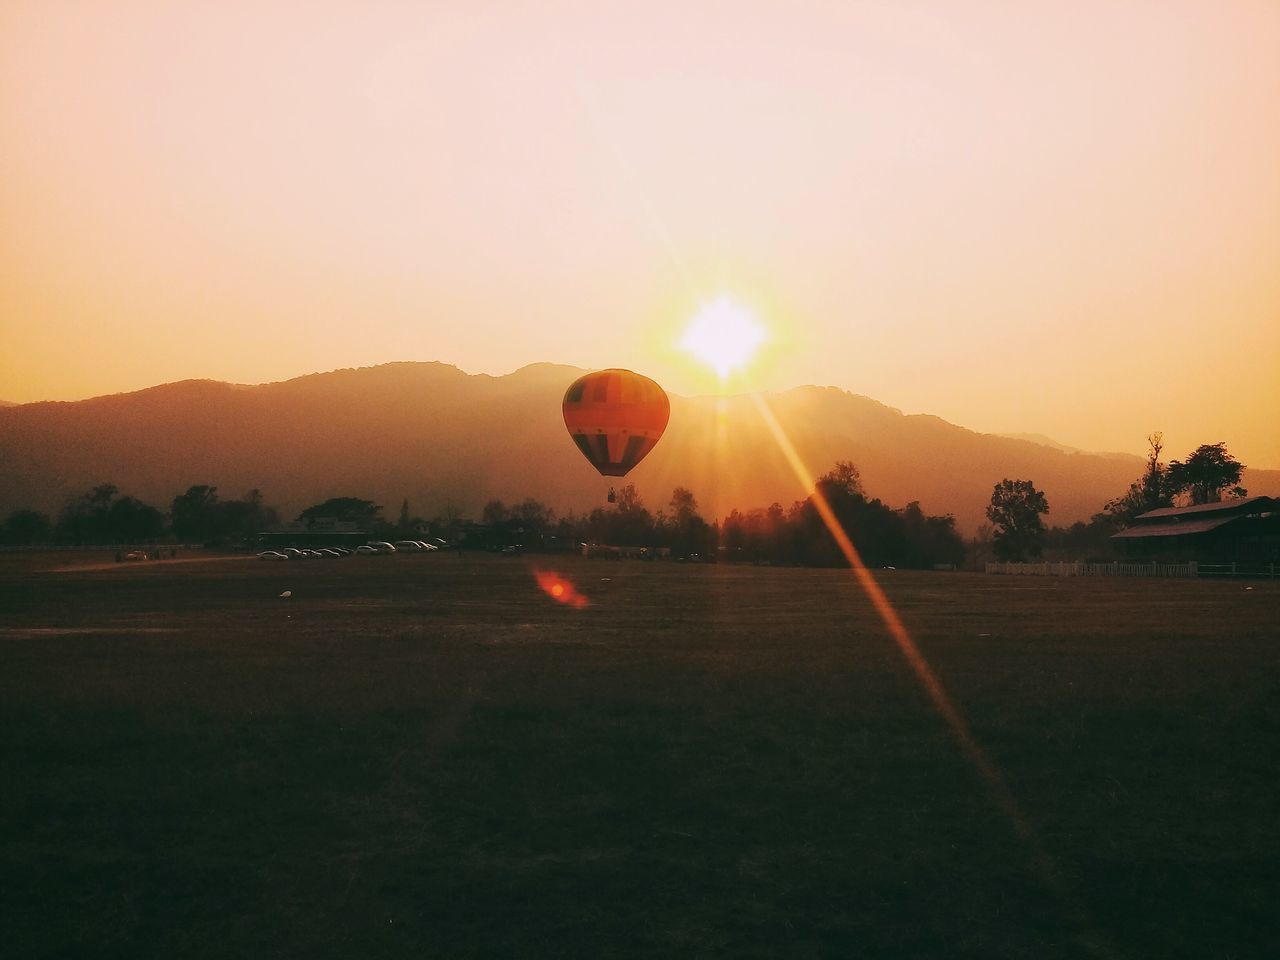 VIEW OF HOT AIR BALLOONS ON FIELD AGAINST SKY DURING SUNSET